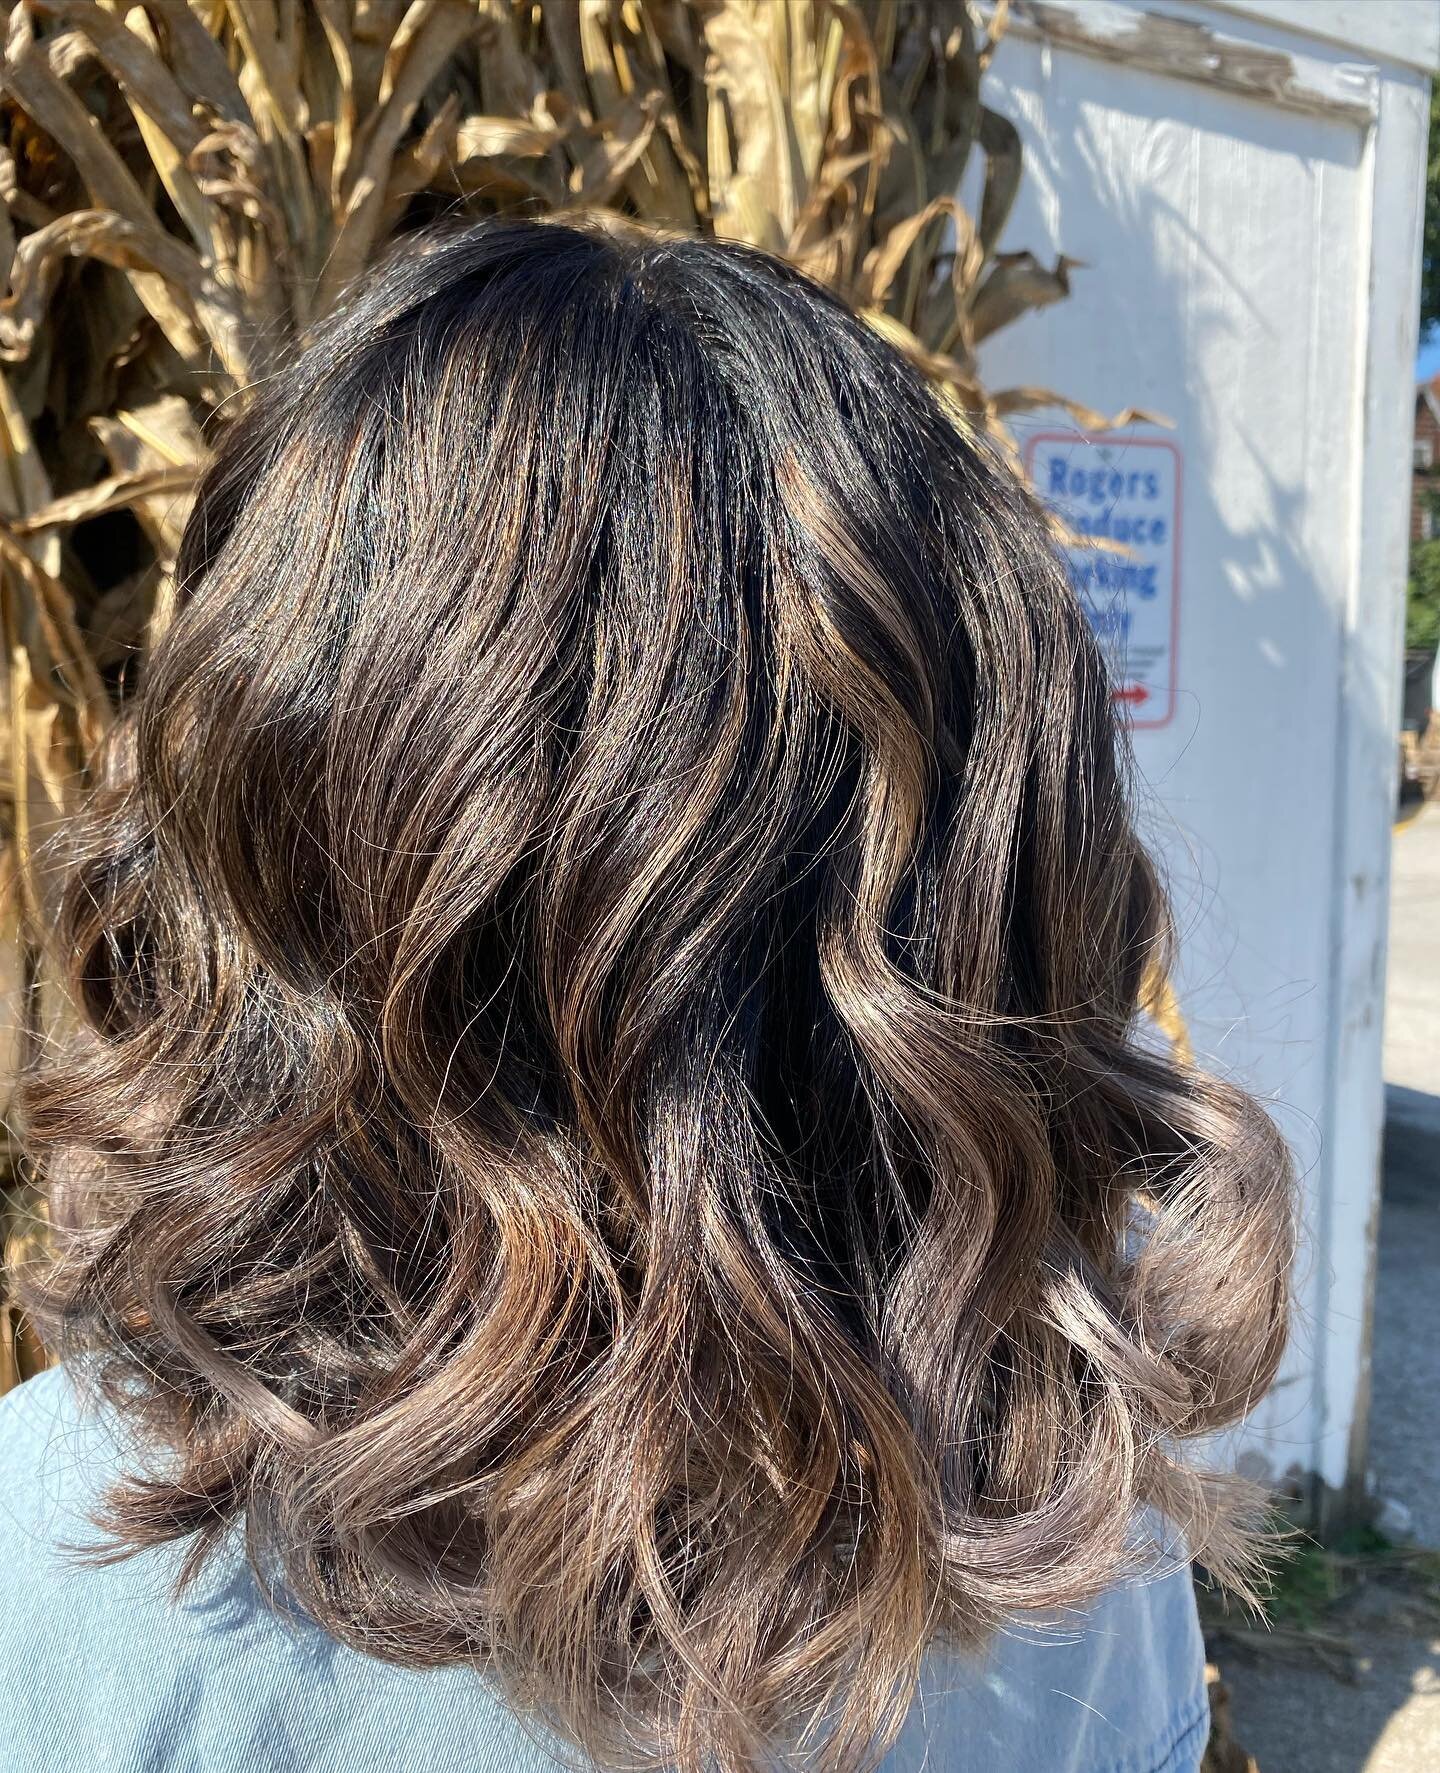 👀look at this beautiful balayage 👀. ⬅️Swipe to see the before  @sillistyles @coric6 #balayagehighlights #lorelprofessionalcolor #webstersalon #stlbalayage #stlstylist #stlcolorist #supportsmallbusiness #supportsalons